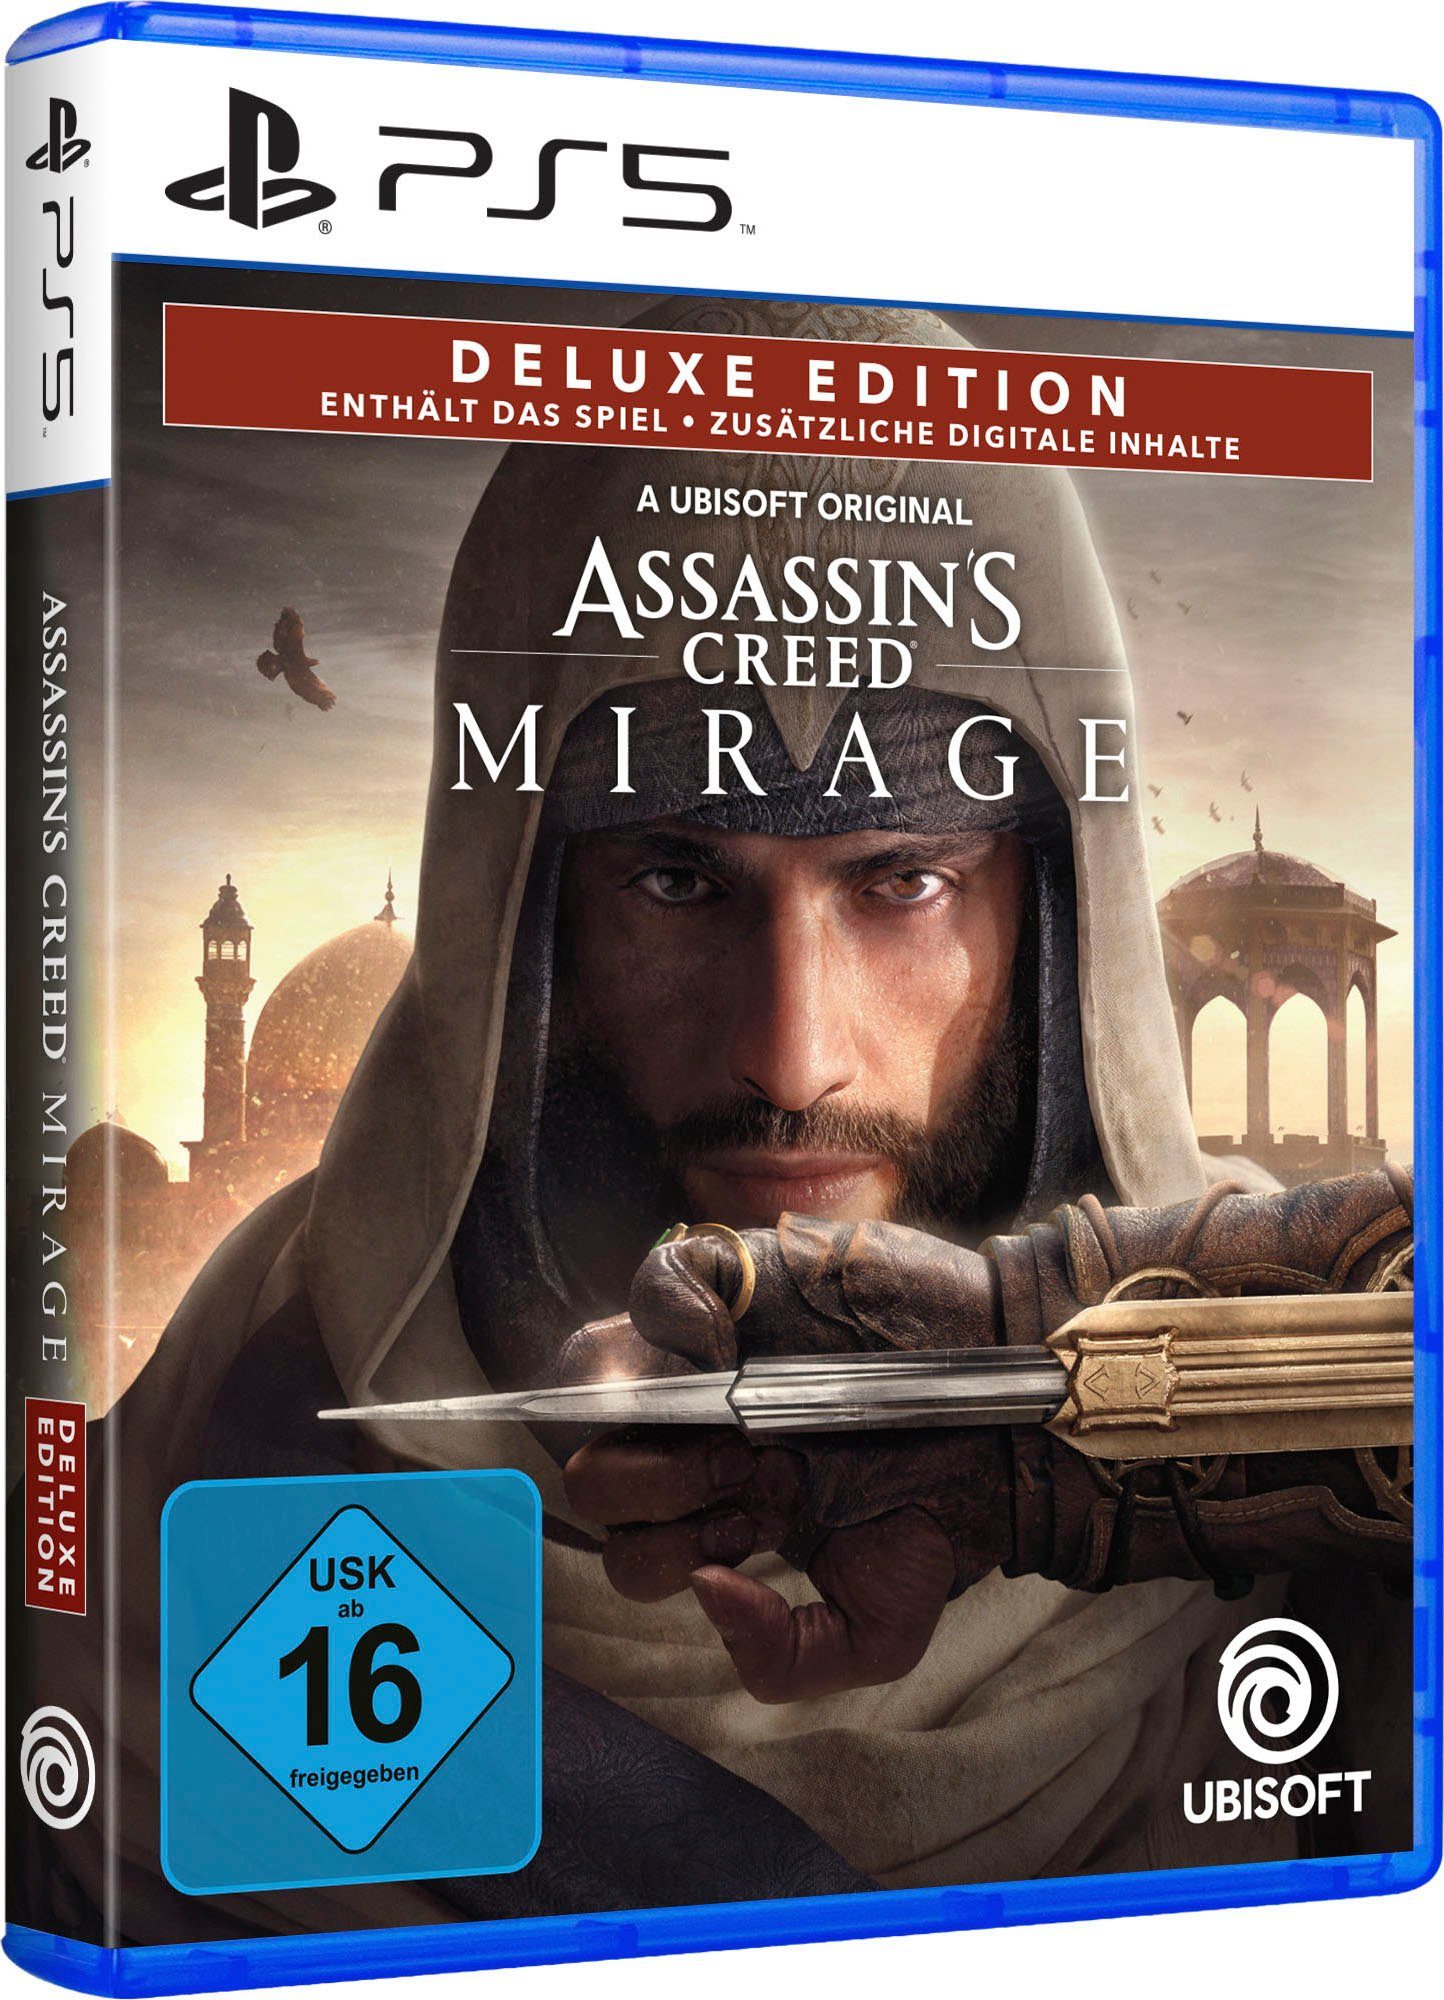 UBISOFT Assassin's Creed - PlayStation 5 Deluxe Edition Mirage